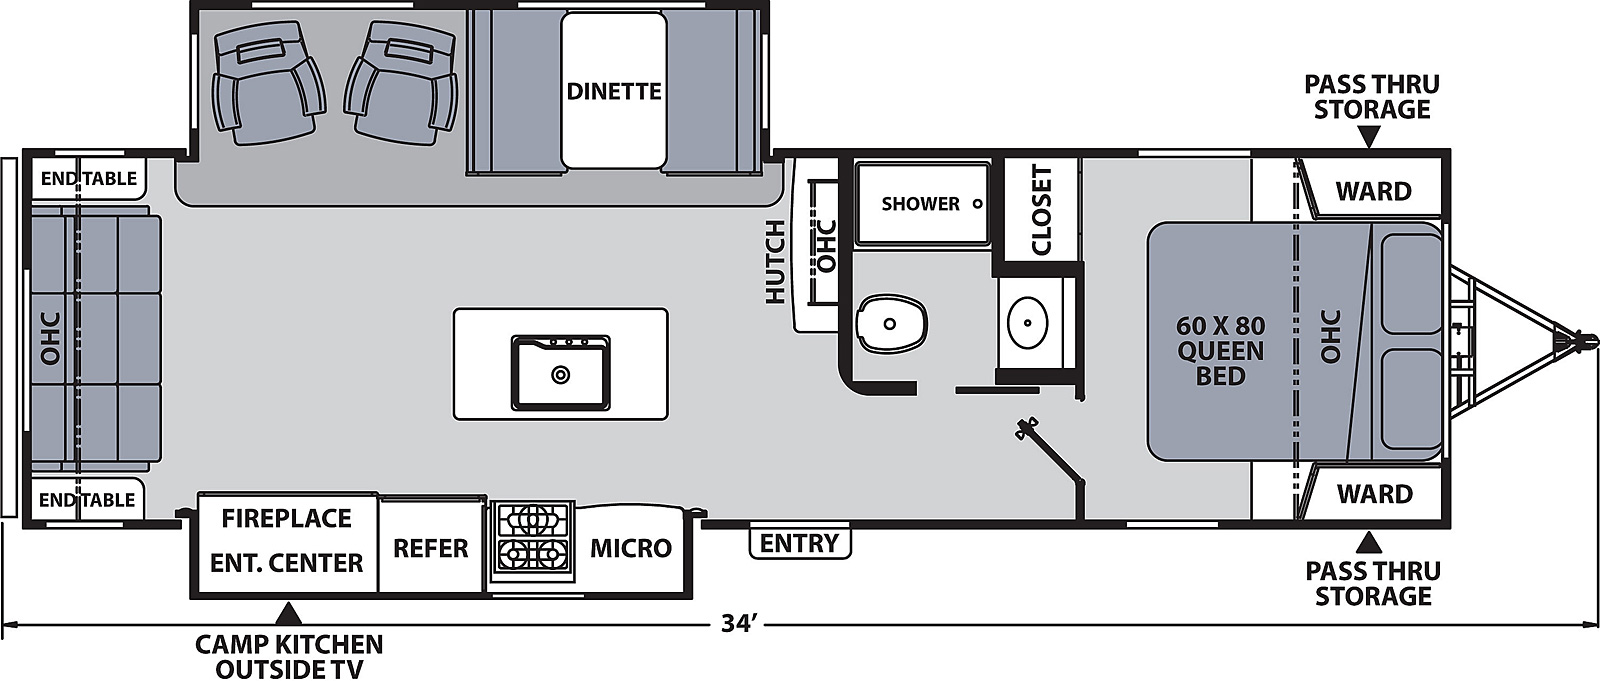 The 293RLDS has two slide outs, one on the off-door side and one on the door side, and one entry door on the door side. Interior layout from front to back: front bedroom with foot facing queen bed, overhead cabinet, wardrobes on either side of the bed, and closet on off-door side; off door side side aisle bathroom; hutch with overhead cabinet on off-door side. off-door side slide out containing dinette and two chairs; kitchen island with sink; door side slide out with kitchen containing microwave, cook top stove, refrigerator and entertainment center with fireplace; and sofa at the rear with overhead cabinet and two end tables; exterior camp kitchen w/ outside TV towards the rear.